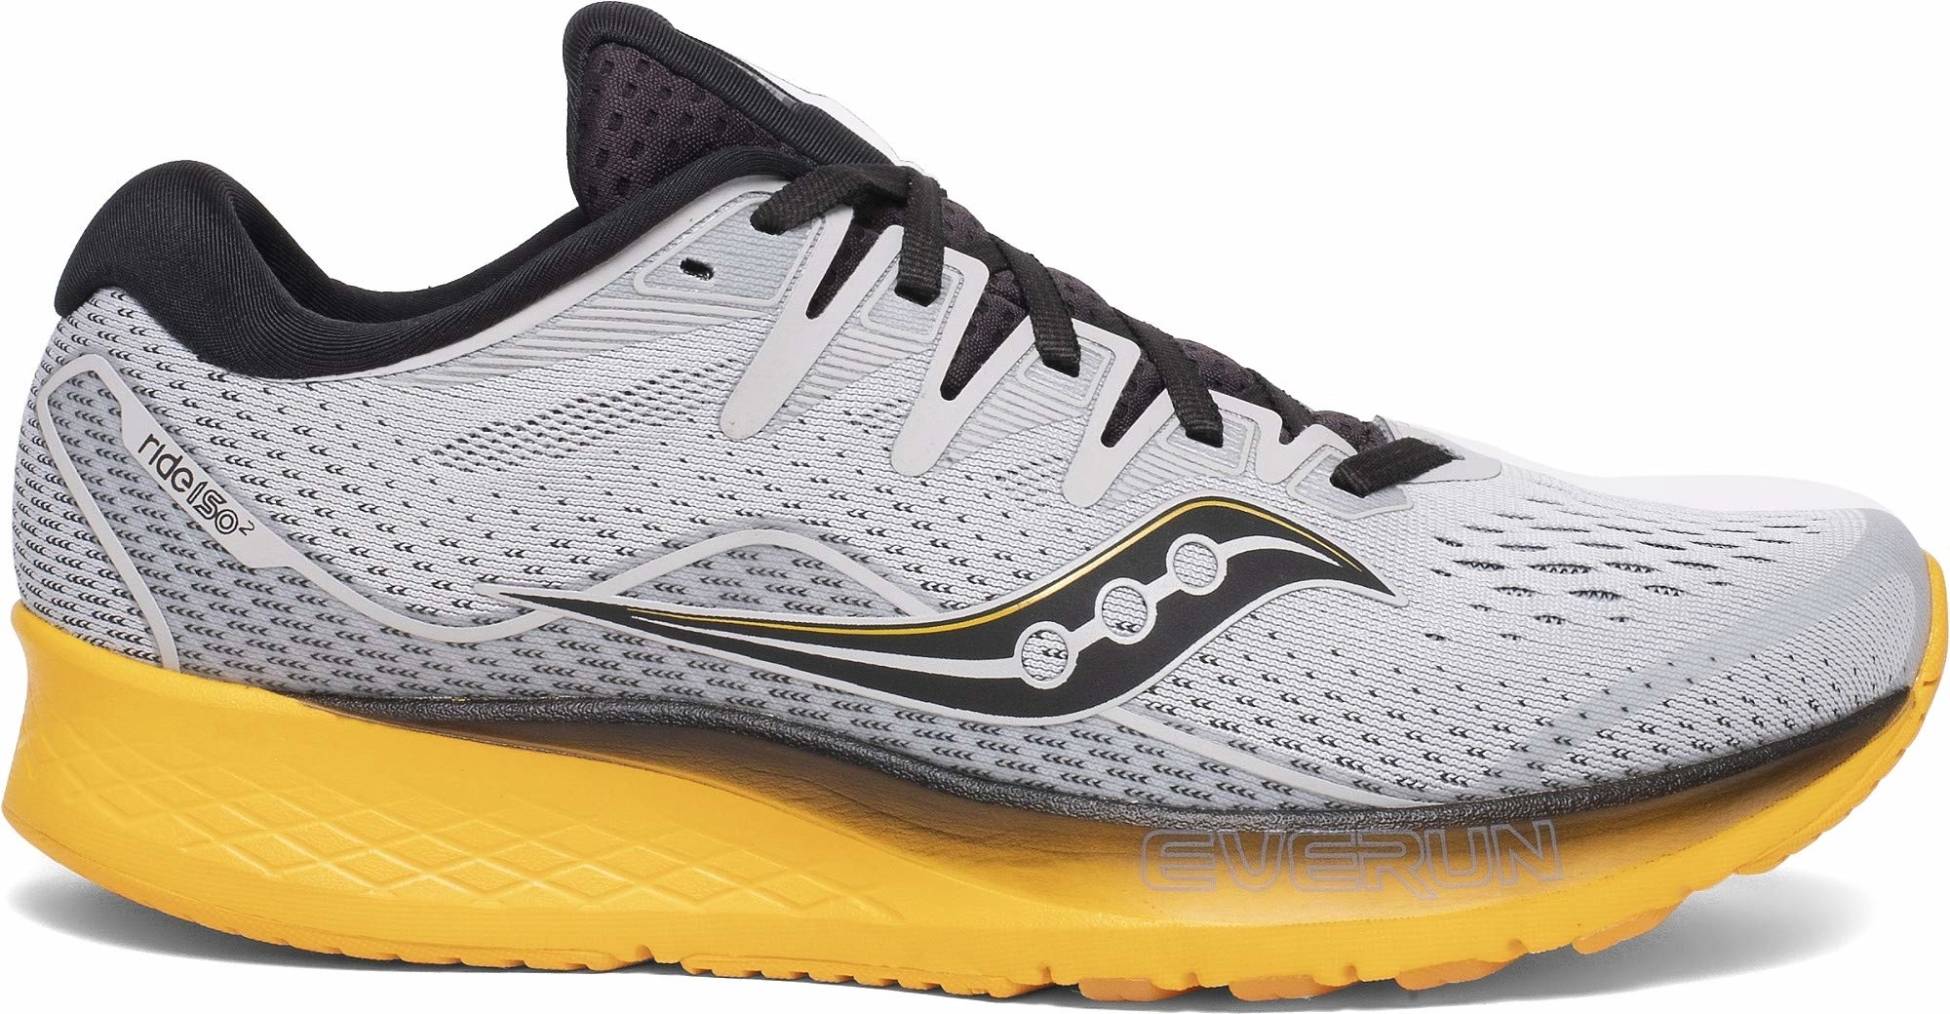 saucony ride iso weight